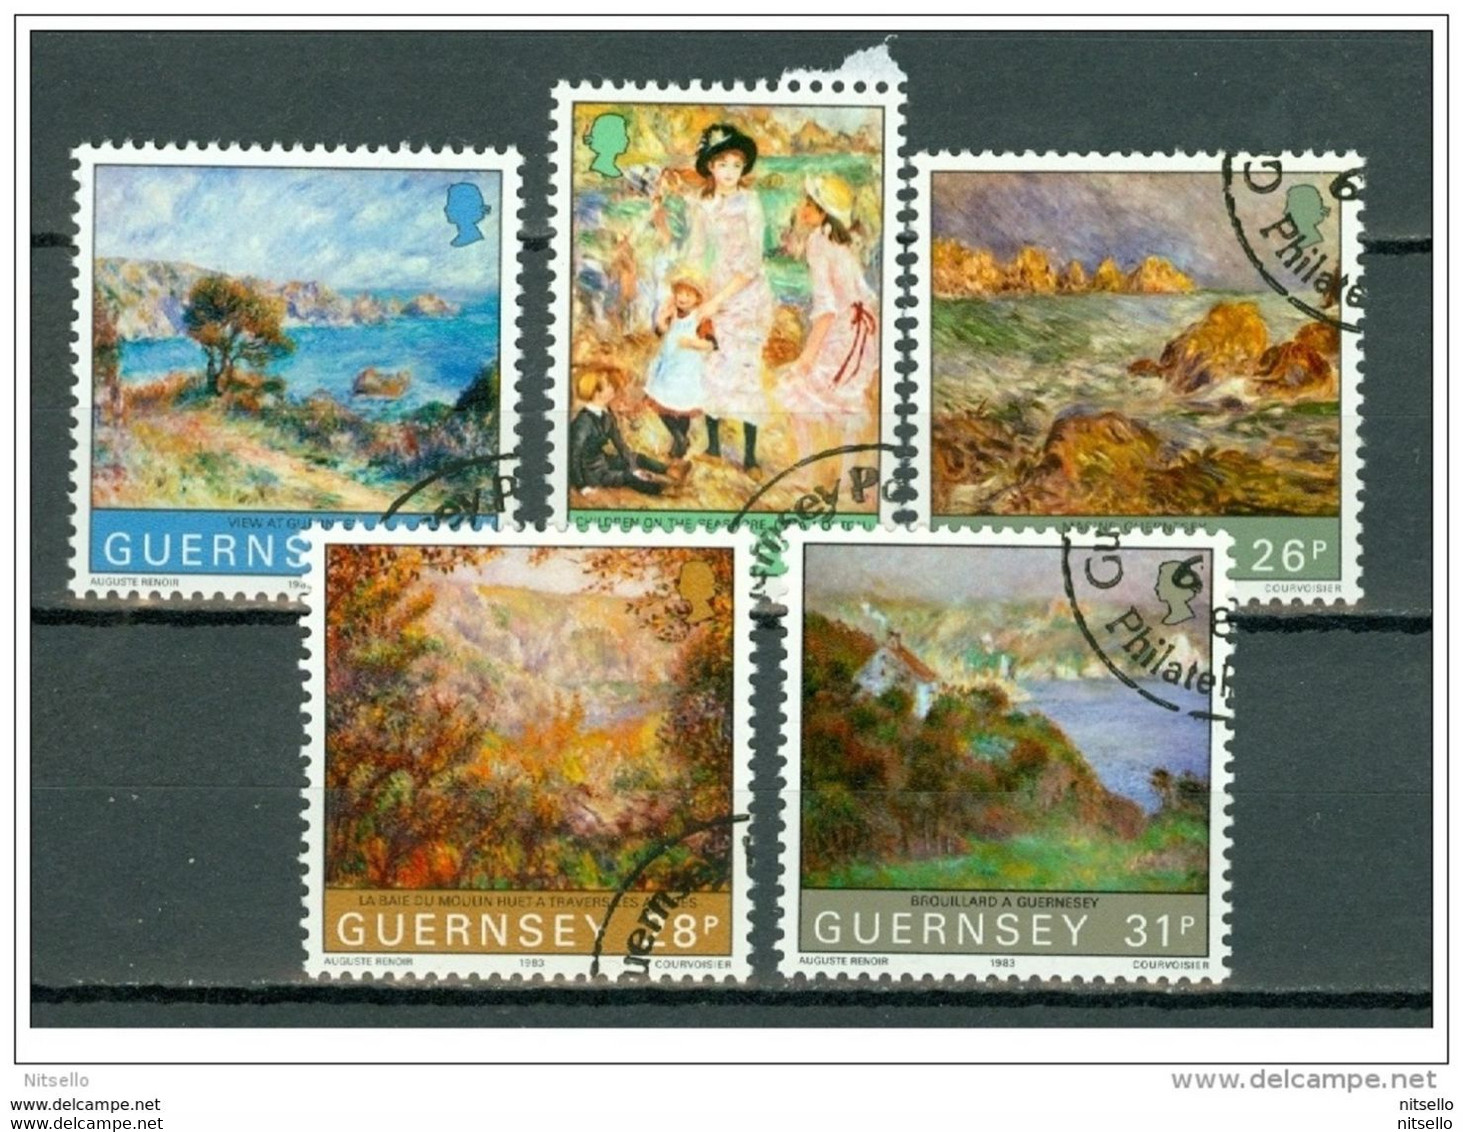 LOTE 2221 ///  (C130) GUERNESEY 1983 Yv. 271/275, SG 277/281 (o) Cote Yv. € 7€ ¡¡¡ OFERTA - LIQUIDATION - JE LIQUIDE !! - Guernesey